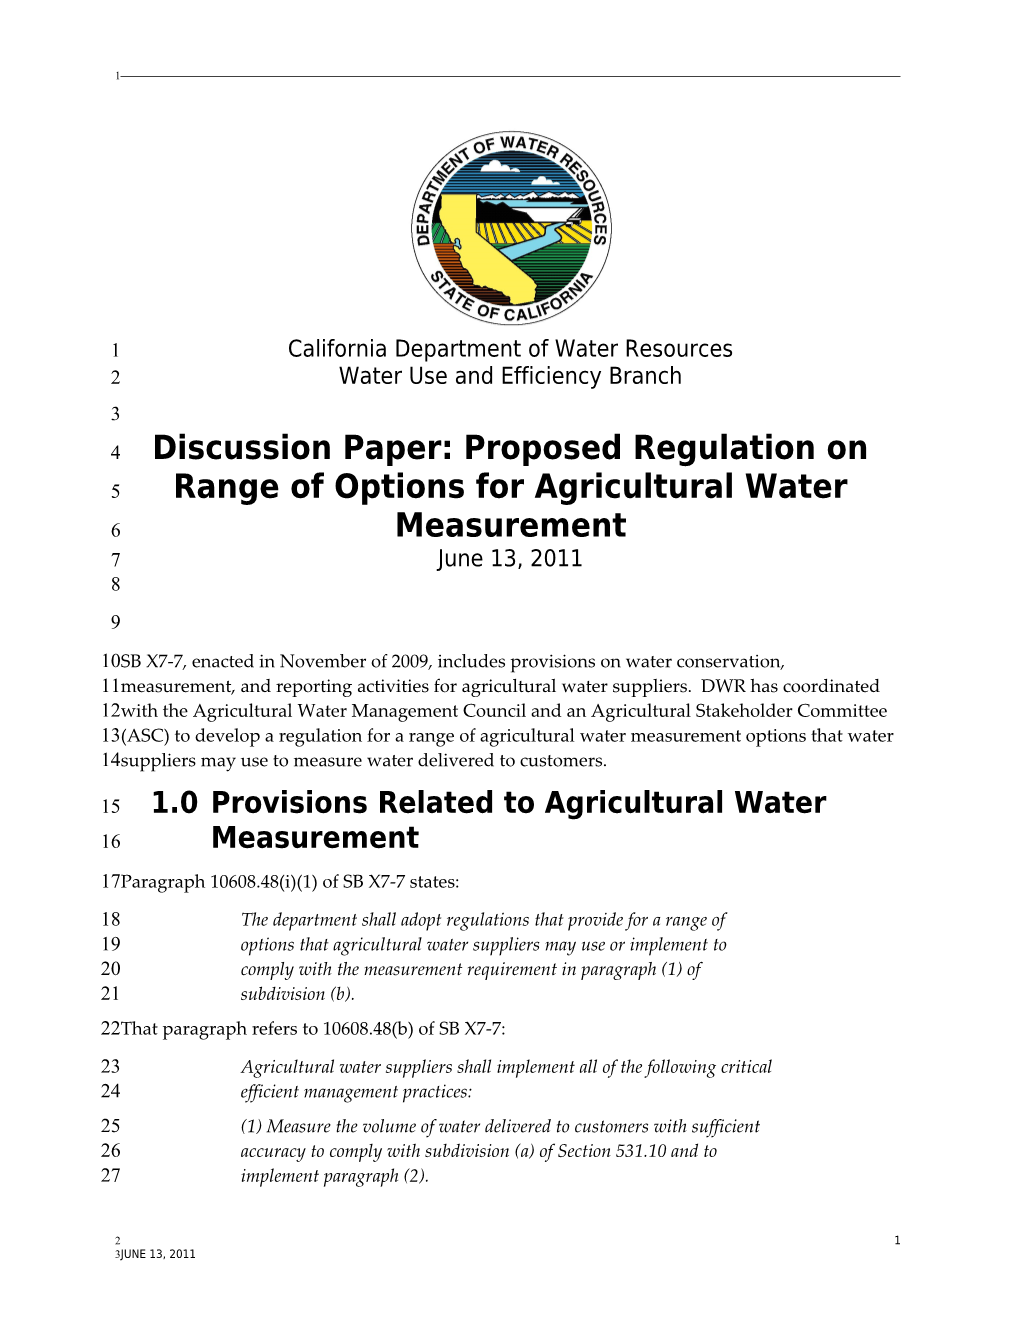 Discussion Paper 2: Agricultural Water Measurement (Project A2)